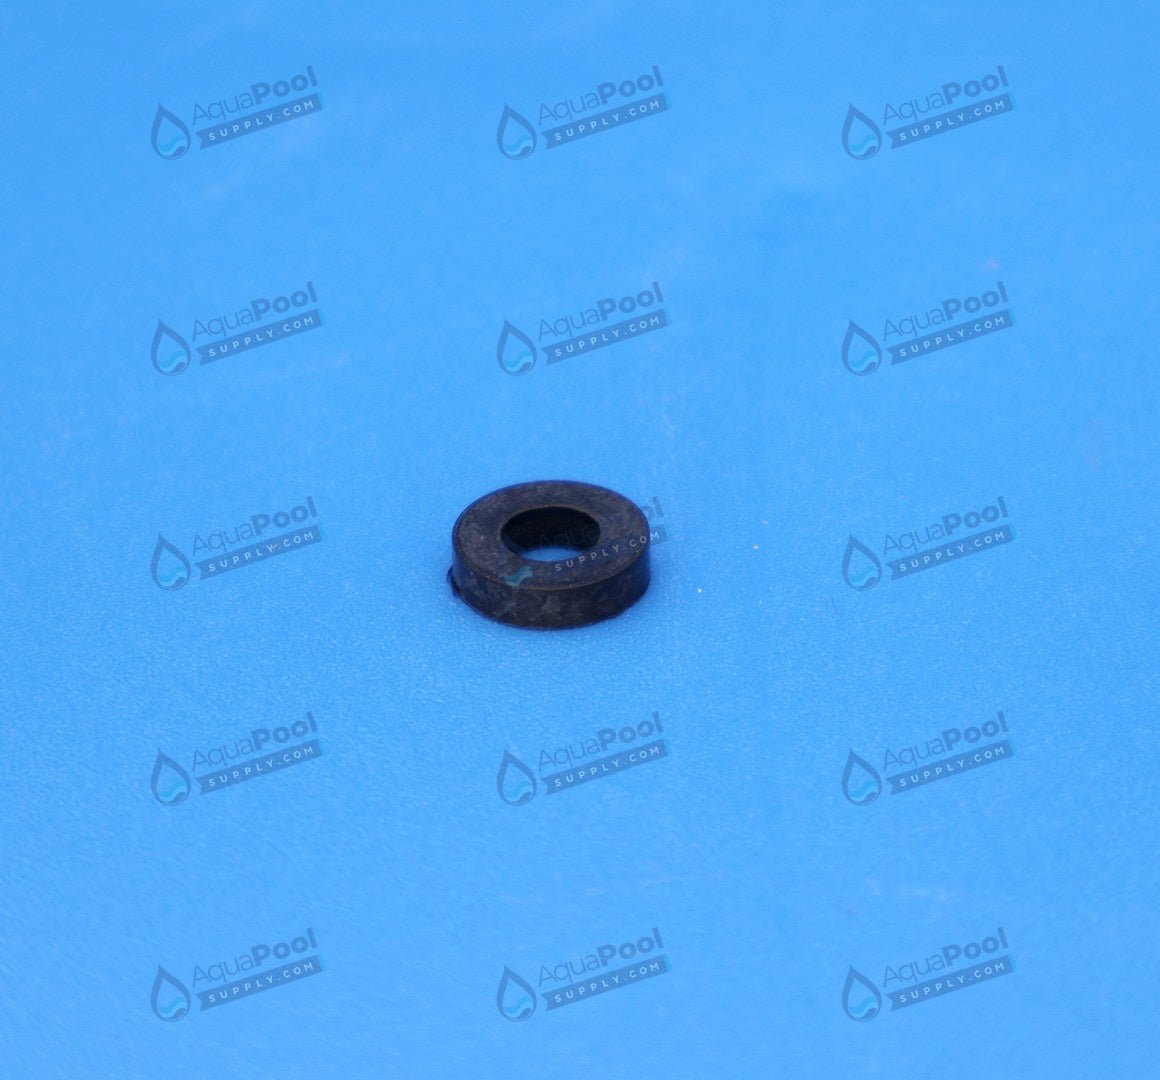 Pentair Whisperflo Rubber Impeller Washer 075713 - Pool Pump Parts - img-1